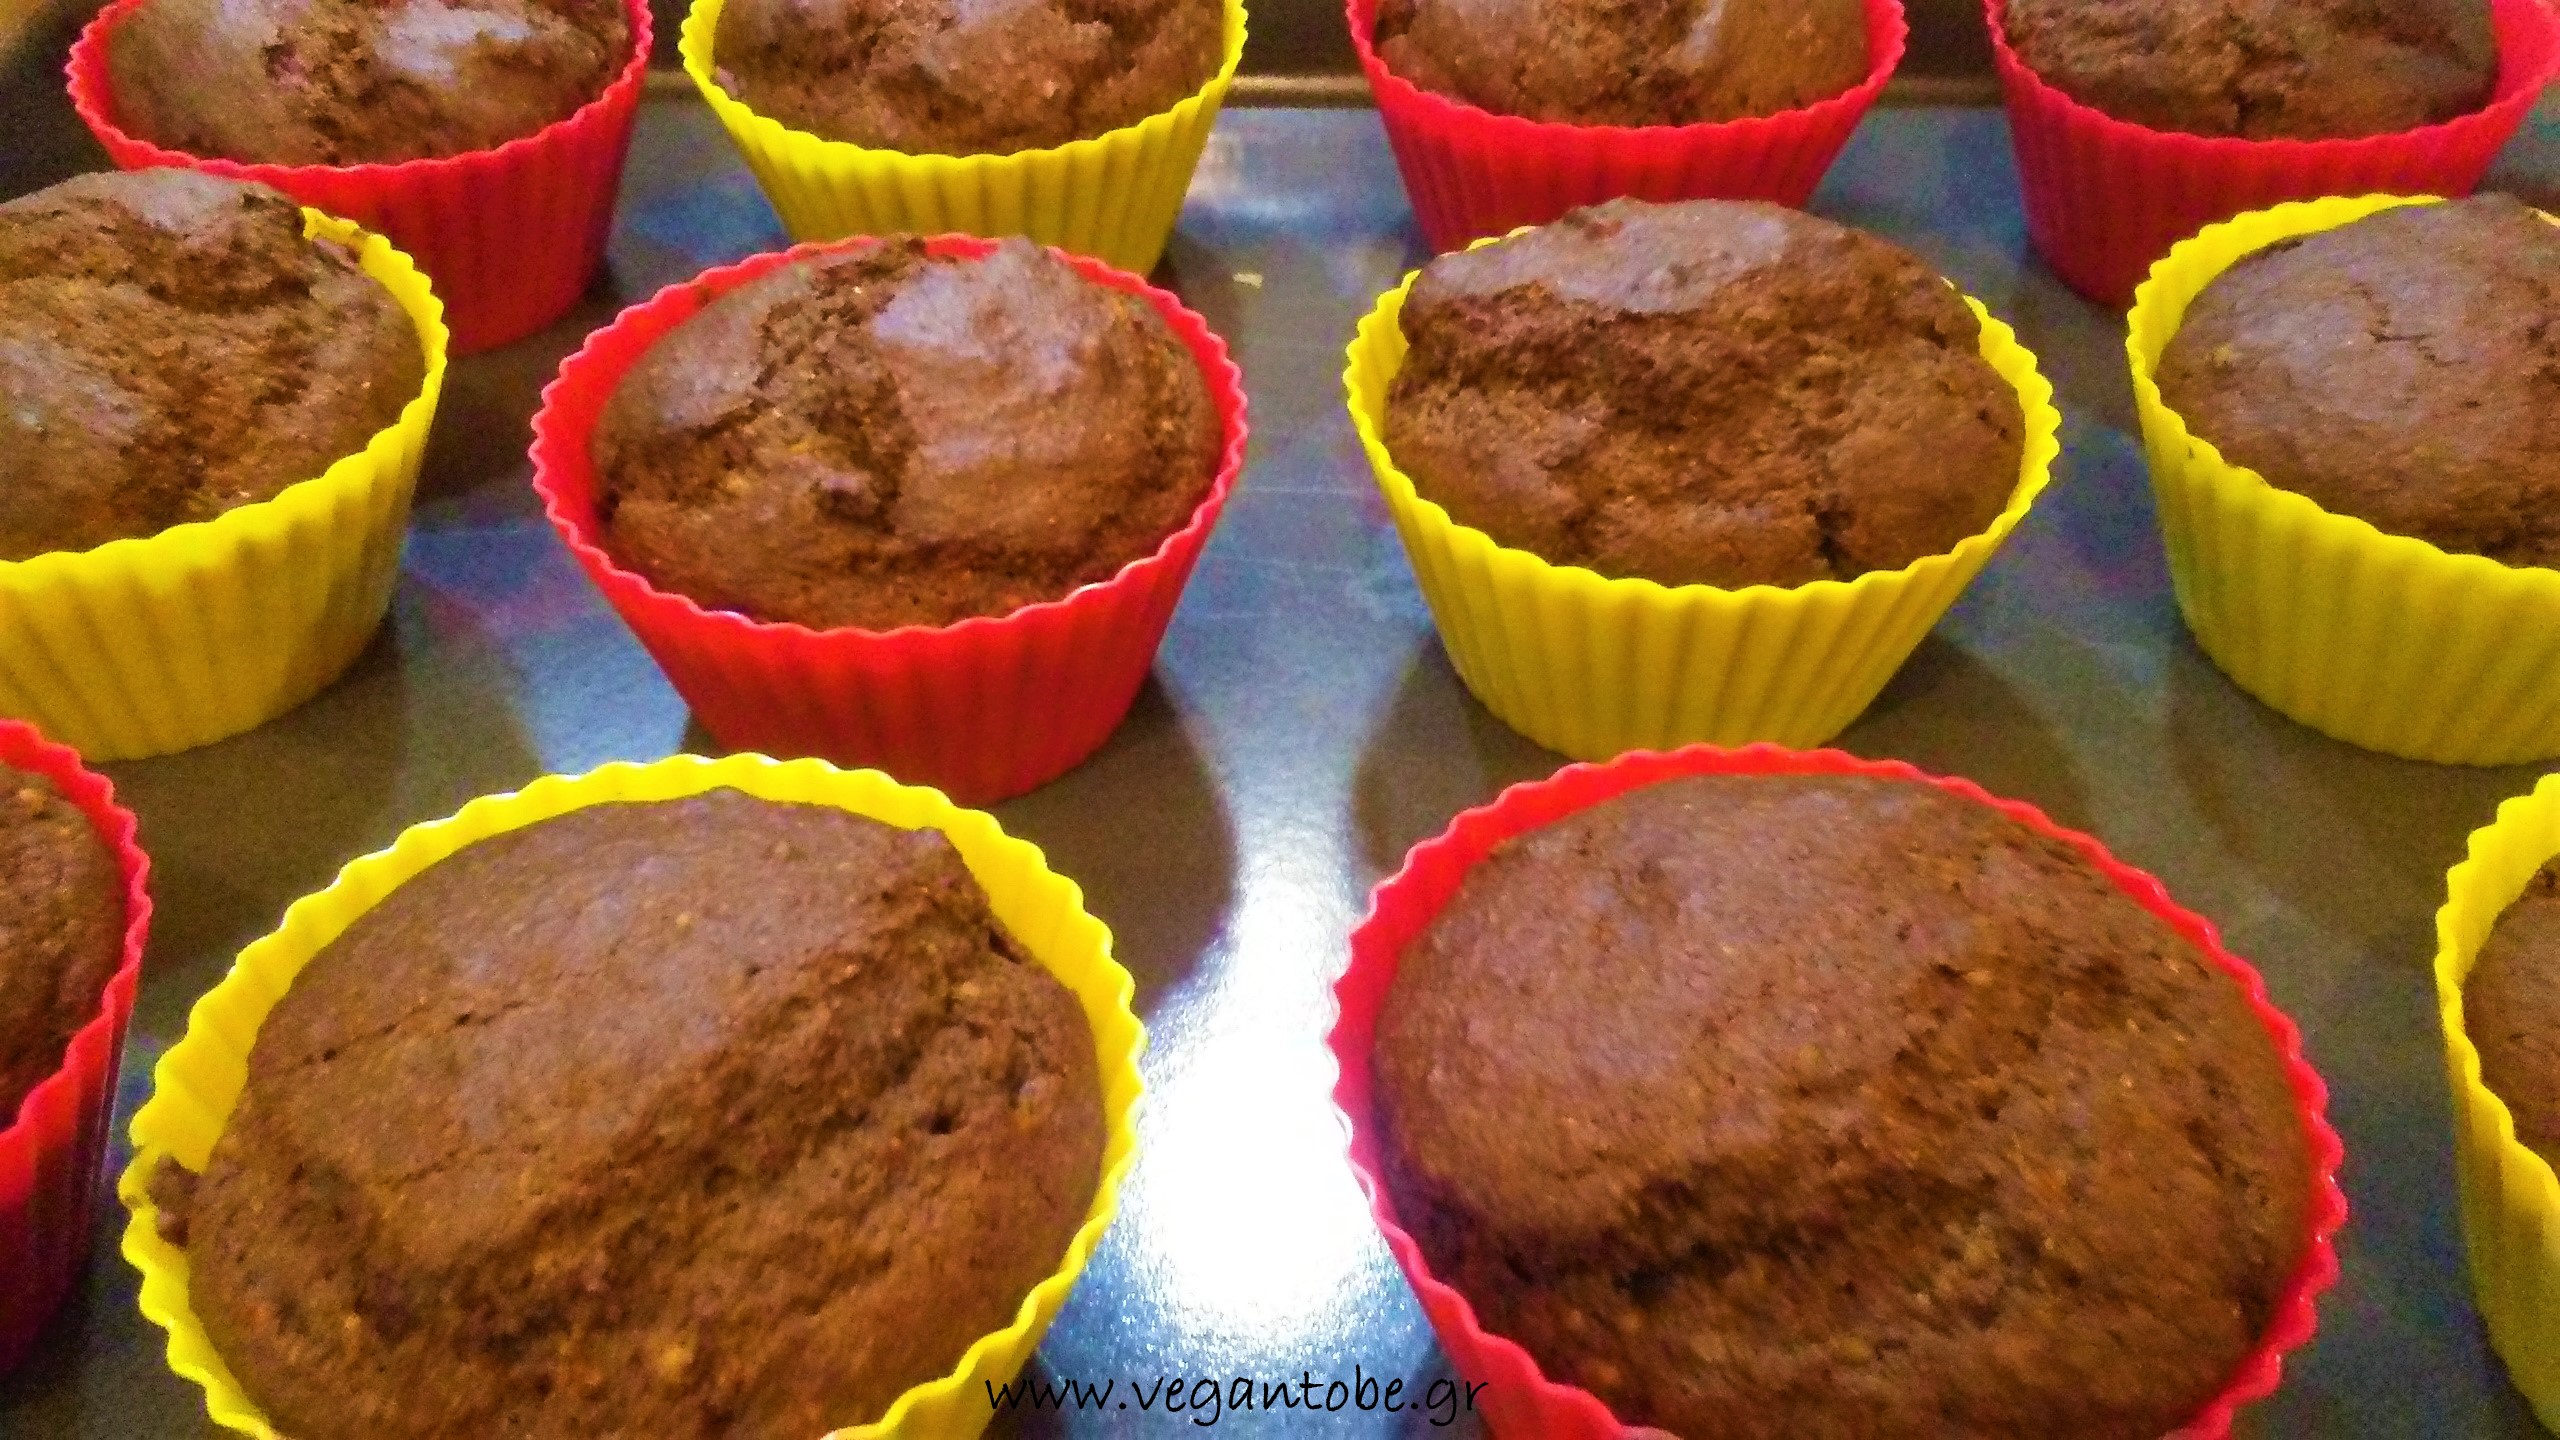 muffins in the pan